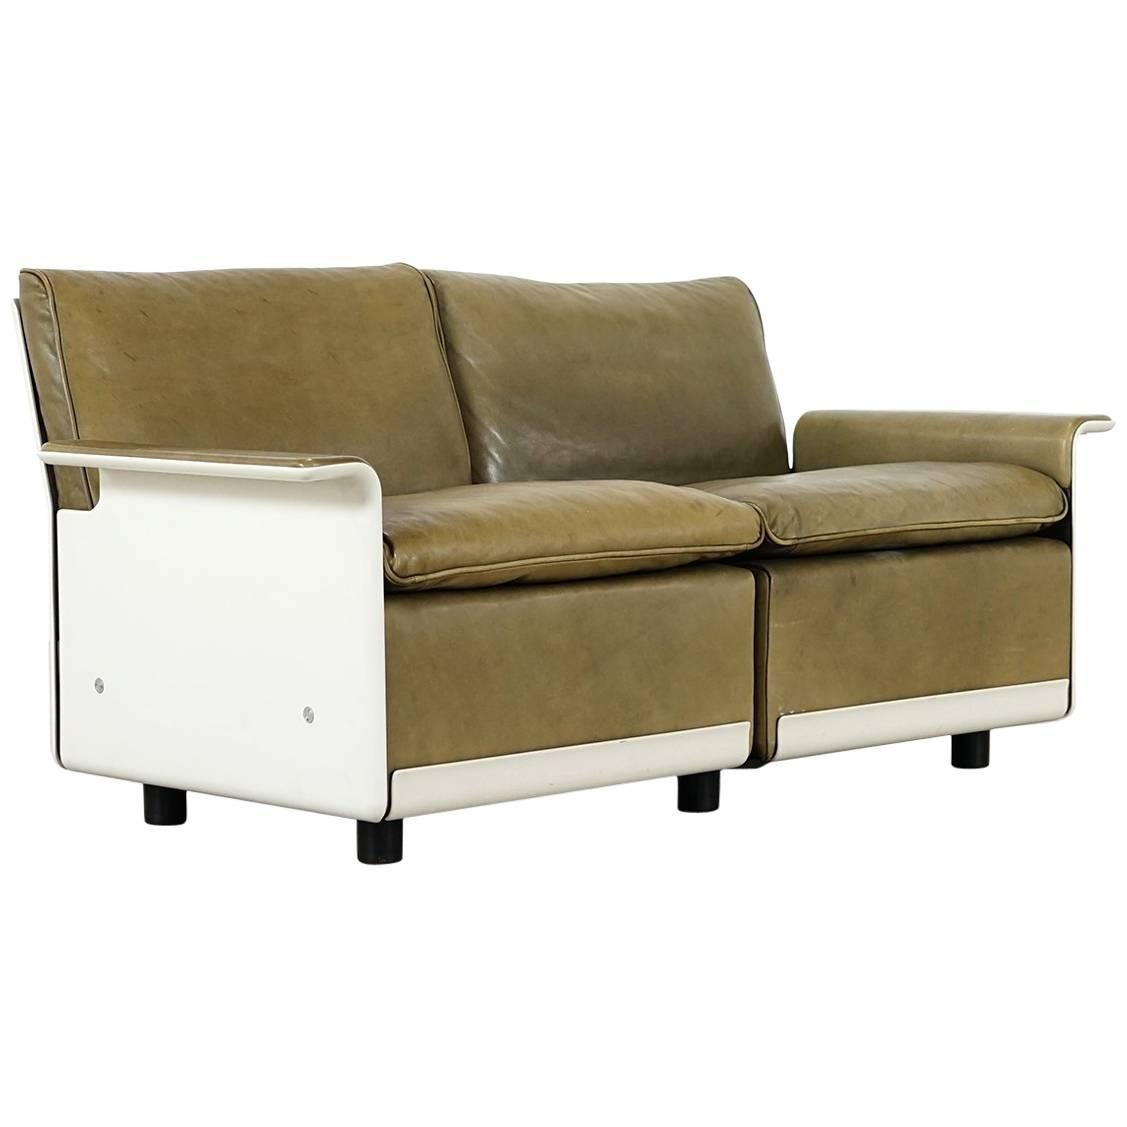 Dieter Rams, Sofa RZ 62 in Olivgreen Leather by Vitsœ, Two-Seat